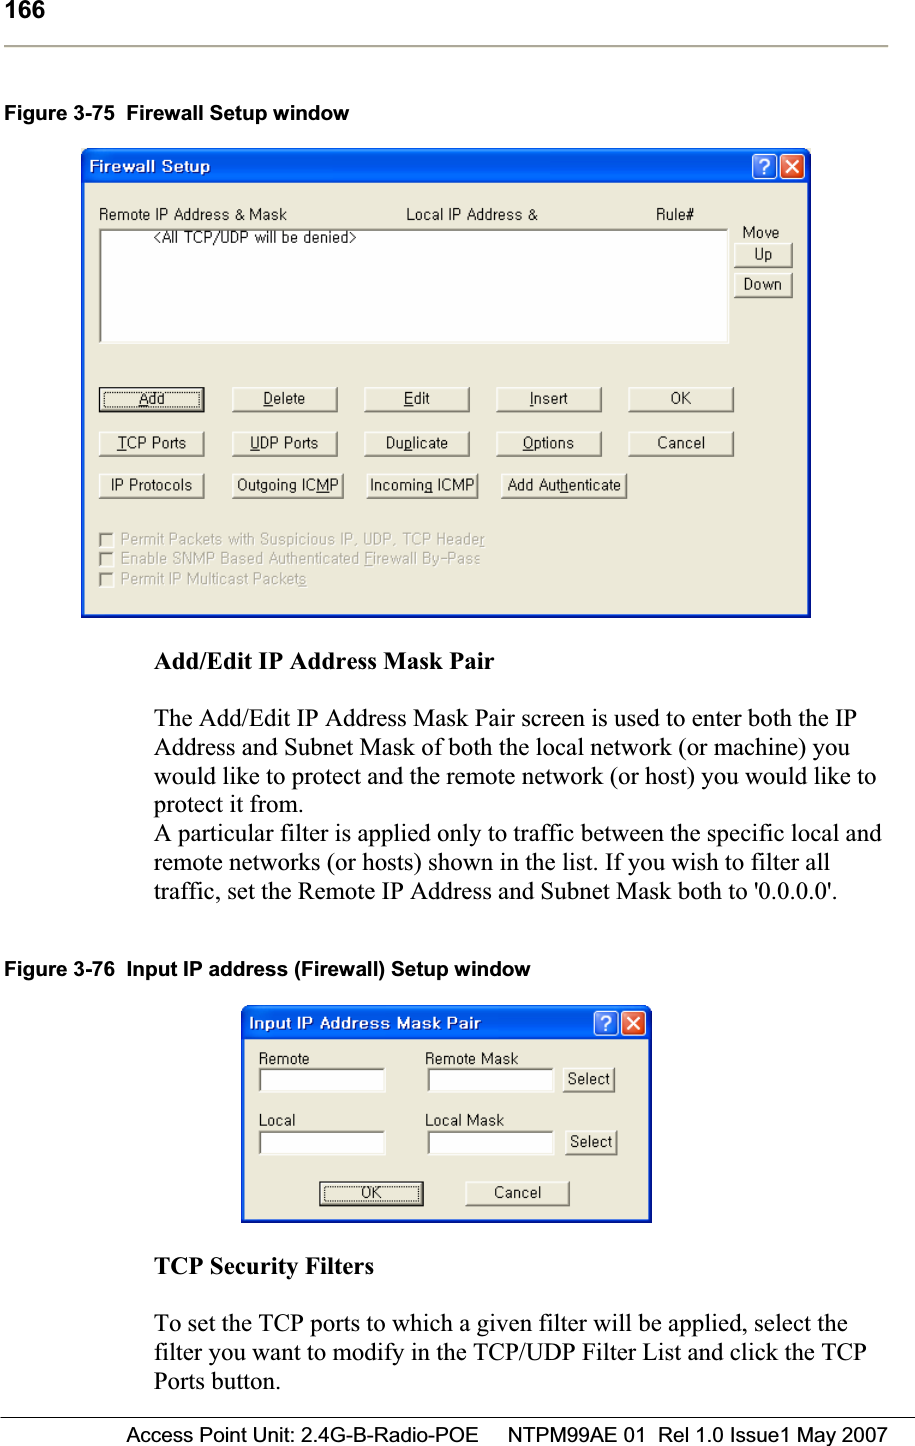 166 Access Point Unit: 2.4G-B-Radio-POE     NTPM99AE 01  Rel 1.0 Issue1 May 2007Figure 3-75  Firewall Setup window Add/Edit IP Address Mask Pair  The Add/Edit IP Address Mask Pair screen is used to enter both the IP Address and Subnet Mask of both the local network (or machine) you would like to protect and the remote network (or host) you would like to protect it from. A particular filter is applied only to traffic between the specific local and remote networks (or hosts) shown in the list. If you wish to filter all traffic, set the Remote IP Address and Subnet Mask both to &apos;0.0.0.0&apos;. Figure 3-76  Input IP address (Firewall) Setup window TCP Security FiltersTo set the TCP ports to which a given filter will be applied, select the filter you want to modify in the TCP/UDP Filter List and click the TCP Ports button. 